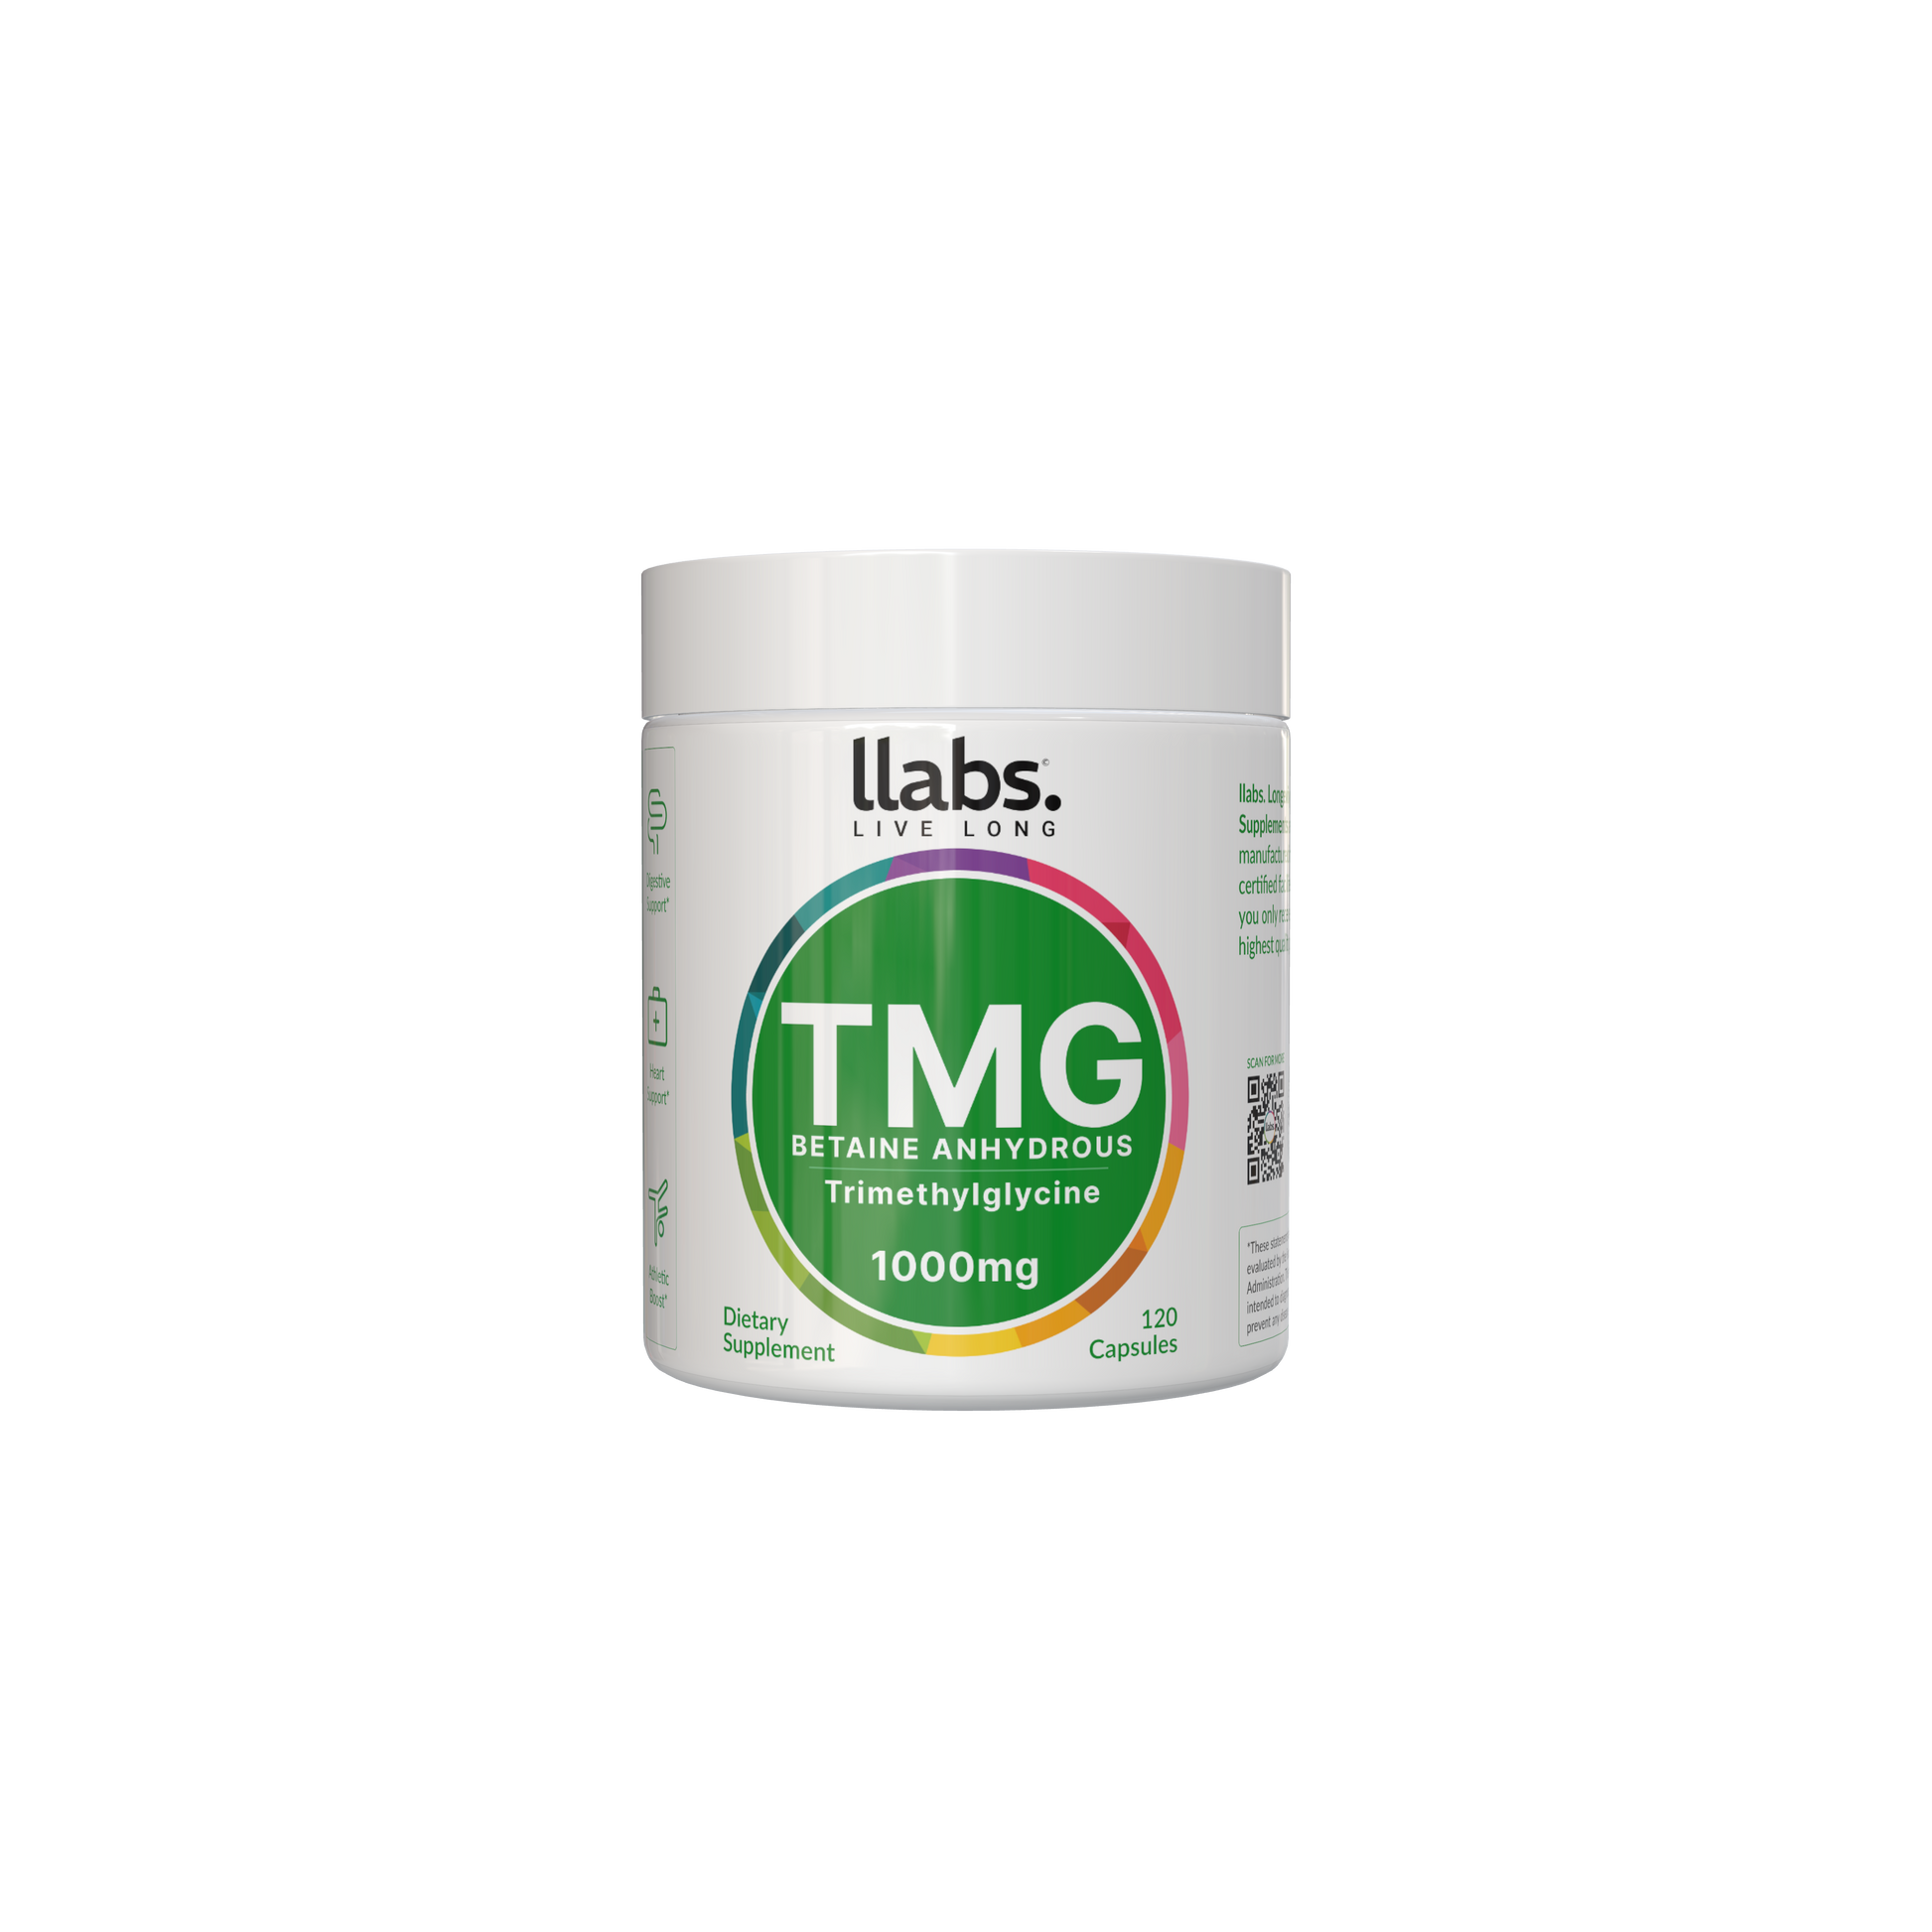 A container of Fisetin + TMG Bundle (betaine anhydrous), 1000mg, 120 count, by Fast Bundle. The label is white with green accents.